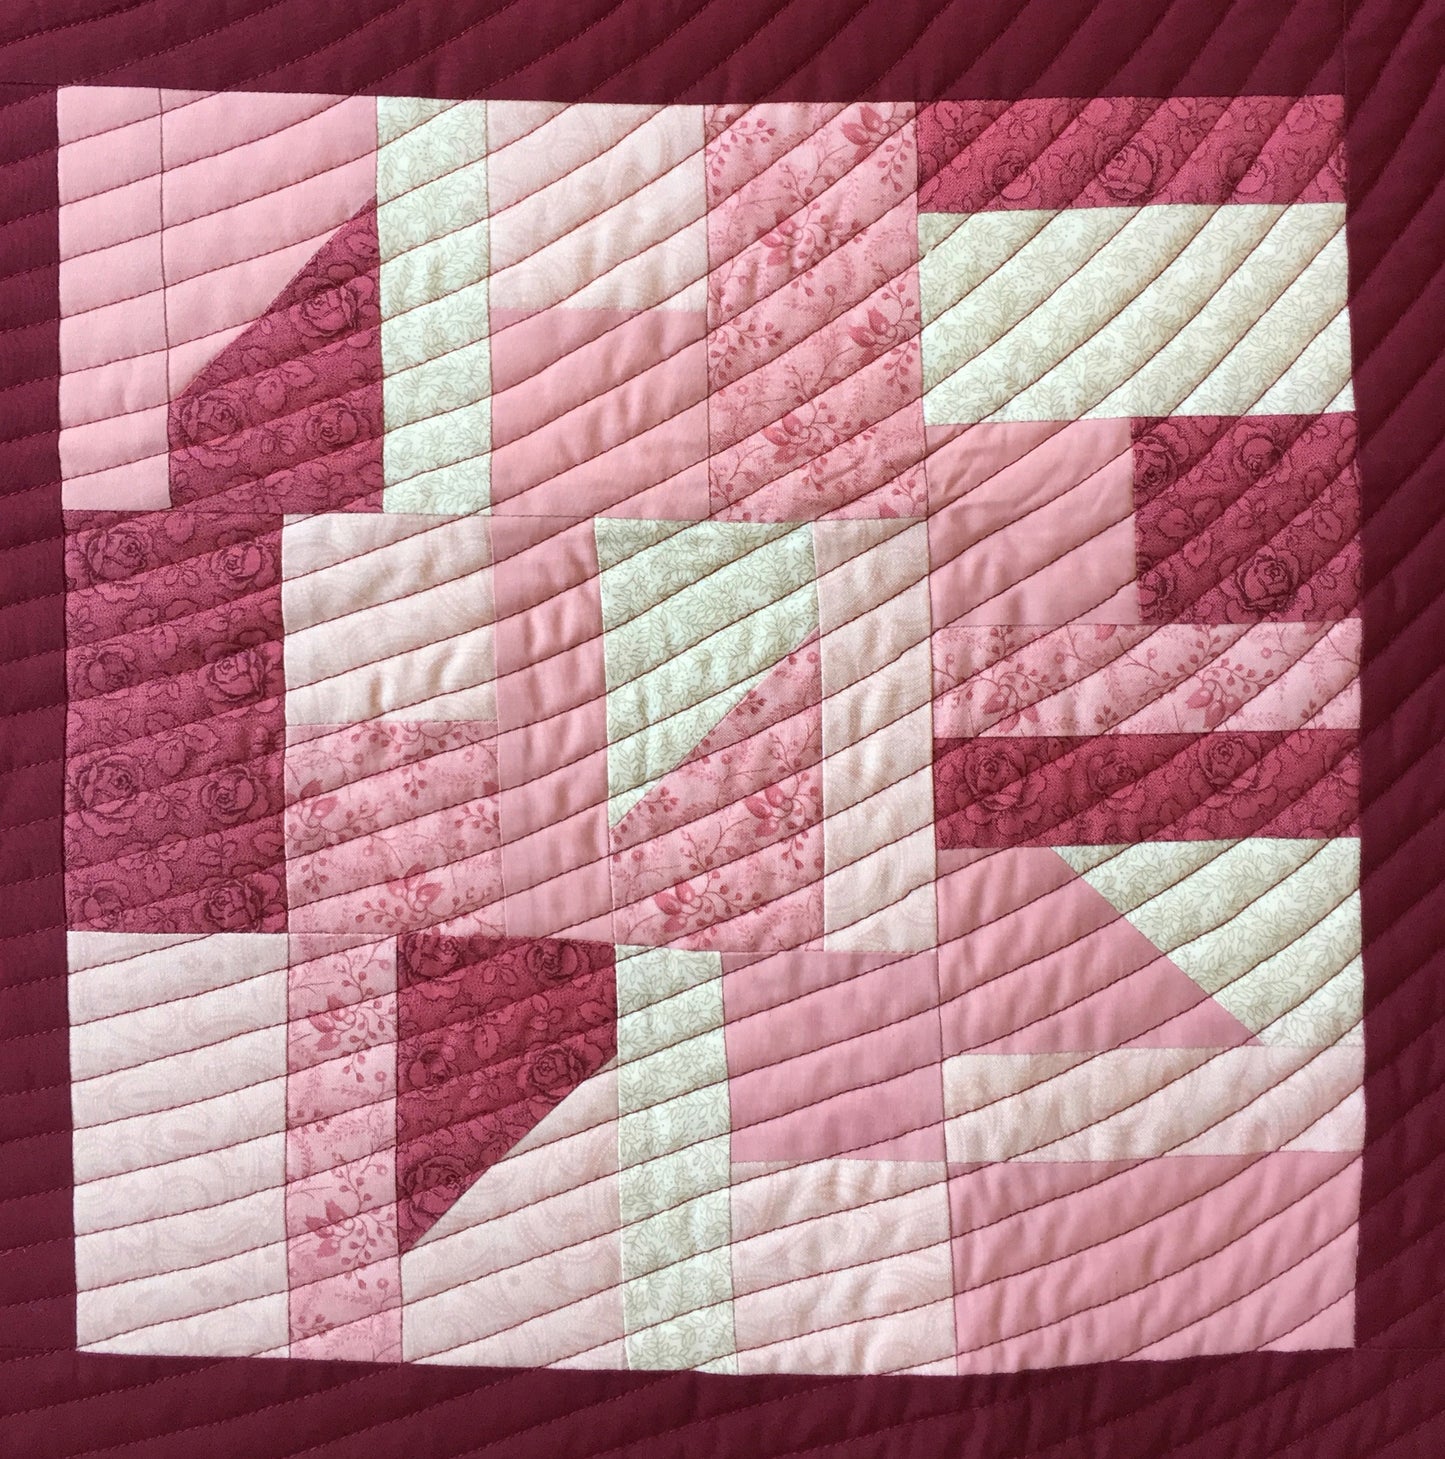 close up of quilt block with random piecing and spiral quilting.